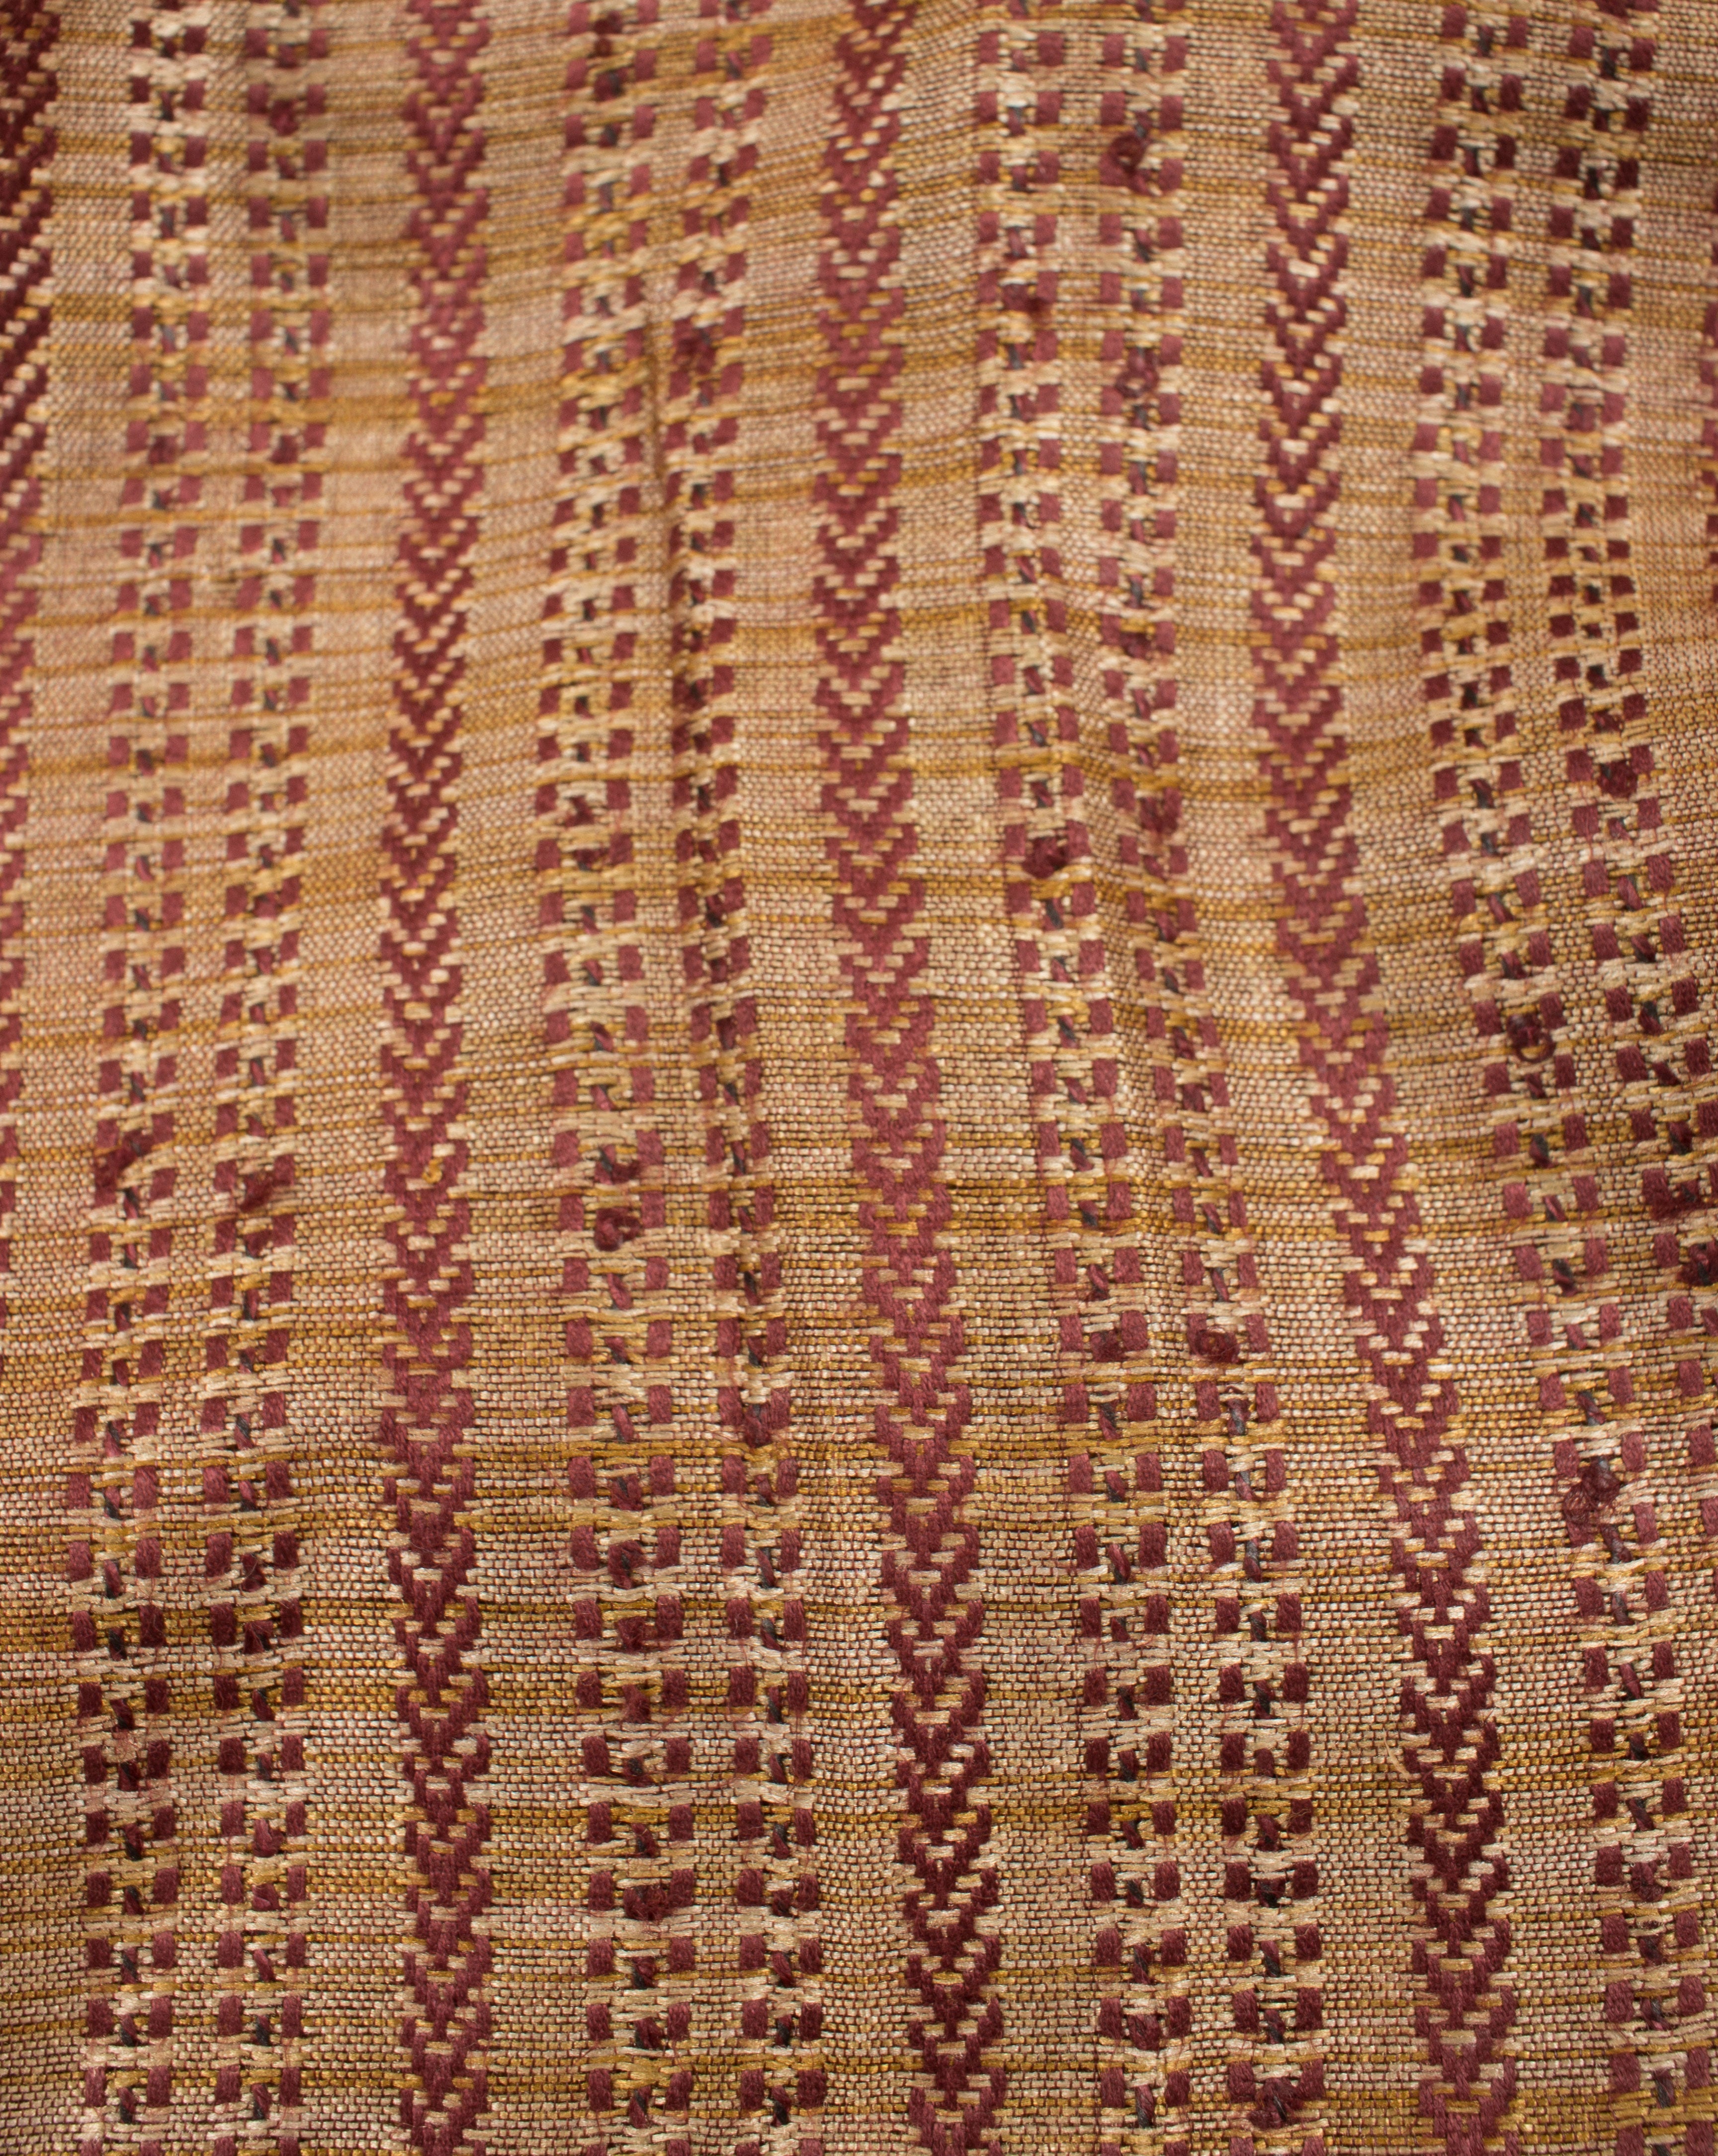 Maroon Gold Stripes Jacquard Blended Cotton Fabric - Fabriclore.com